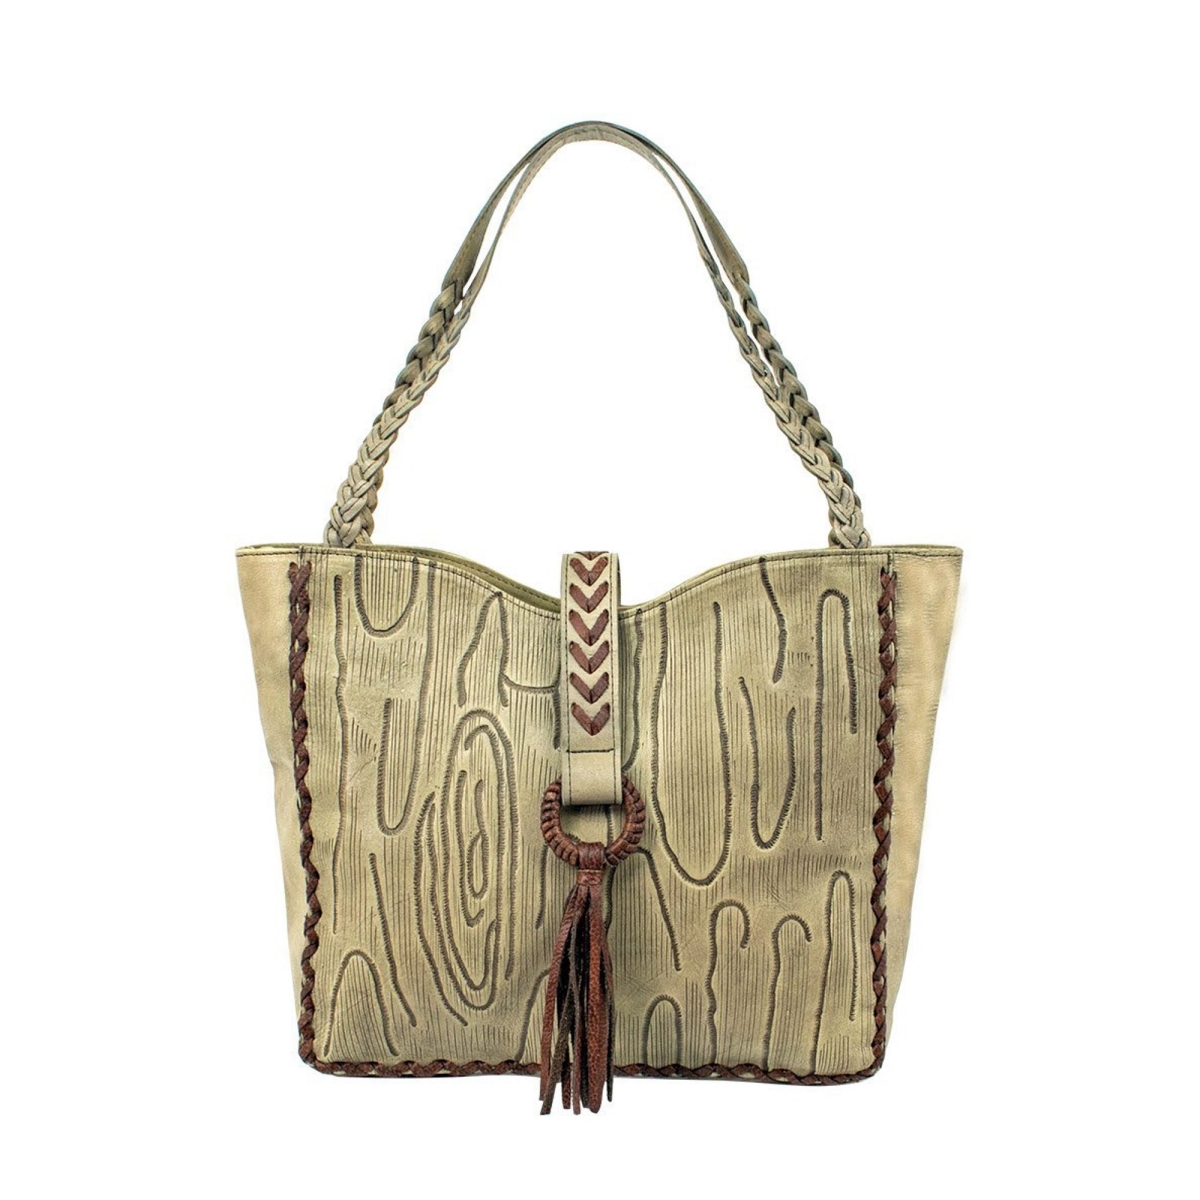 Picture of American West 5352710 Driftwood Tote Bag, Sand